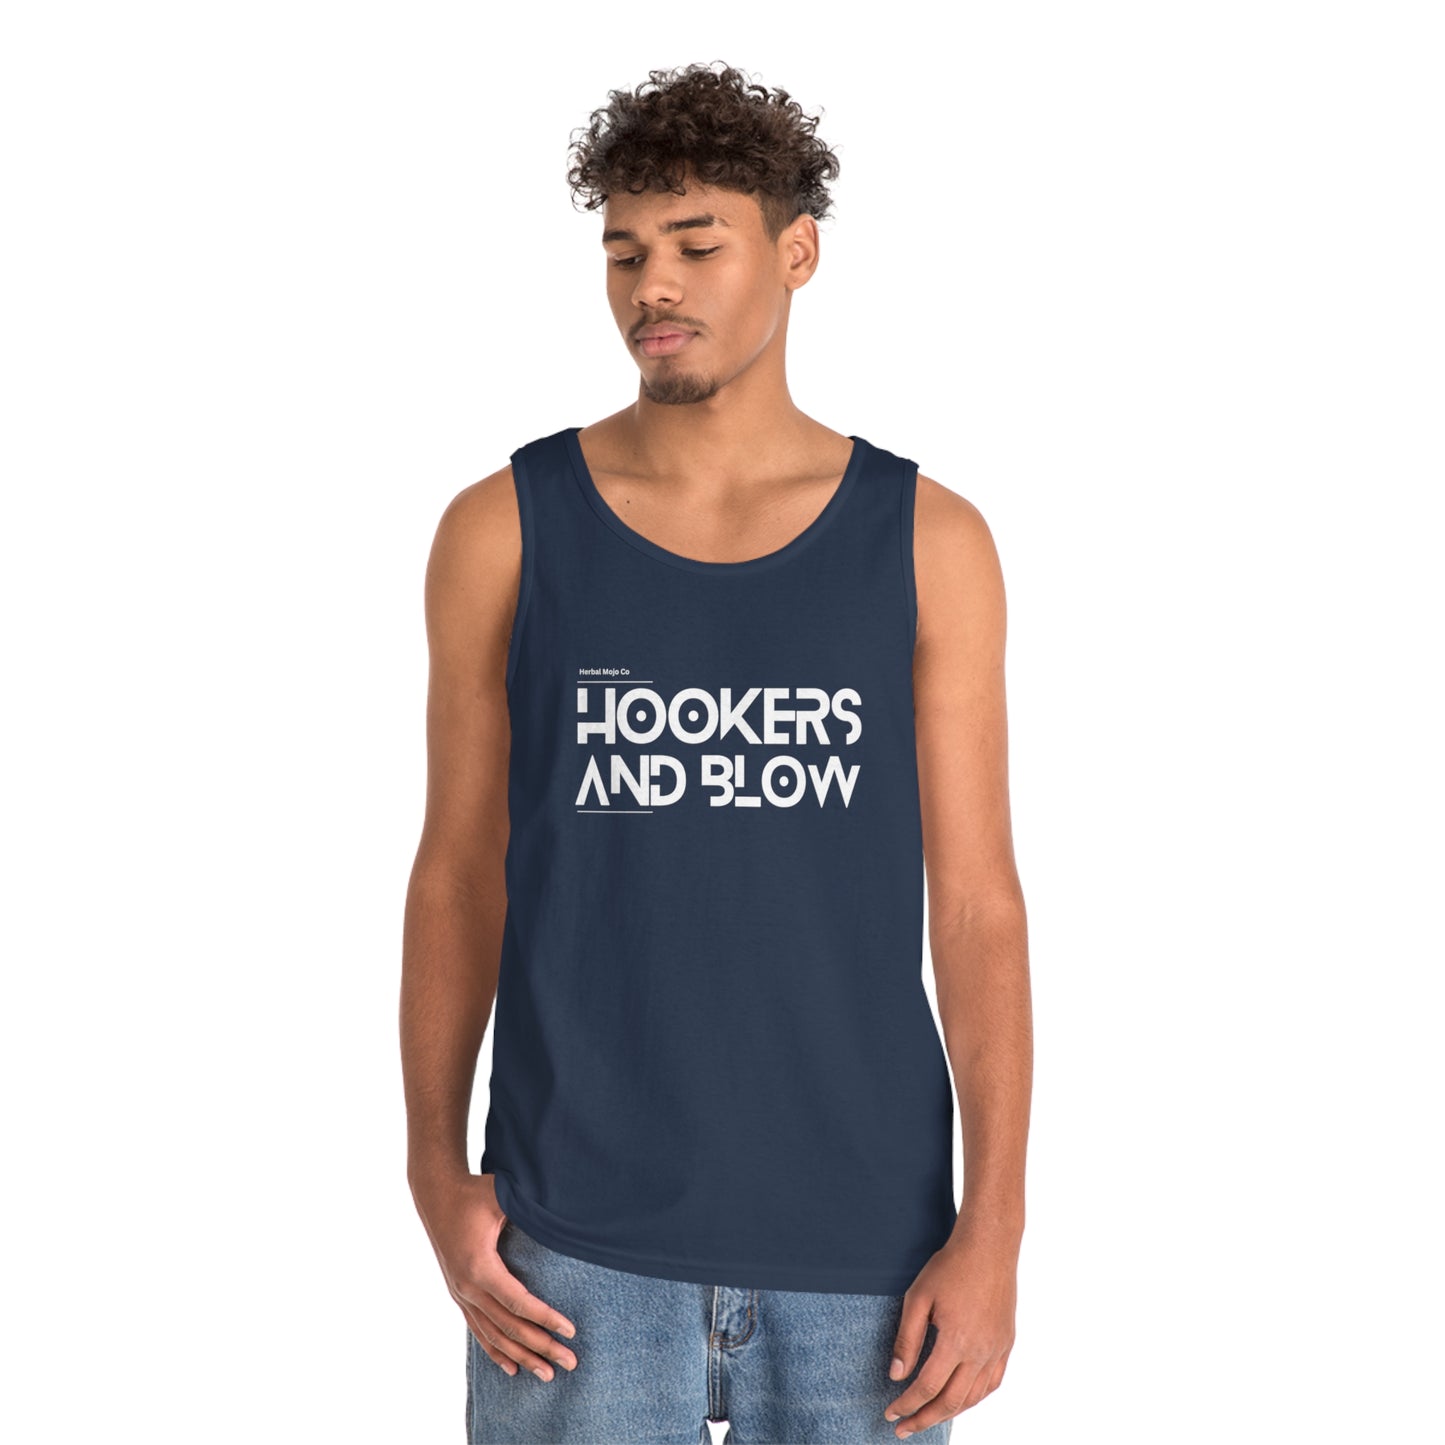 Navy Blue Stamina for Men Hookers & Blow unisex cotton tank top product shot shown in context worn my male with white background